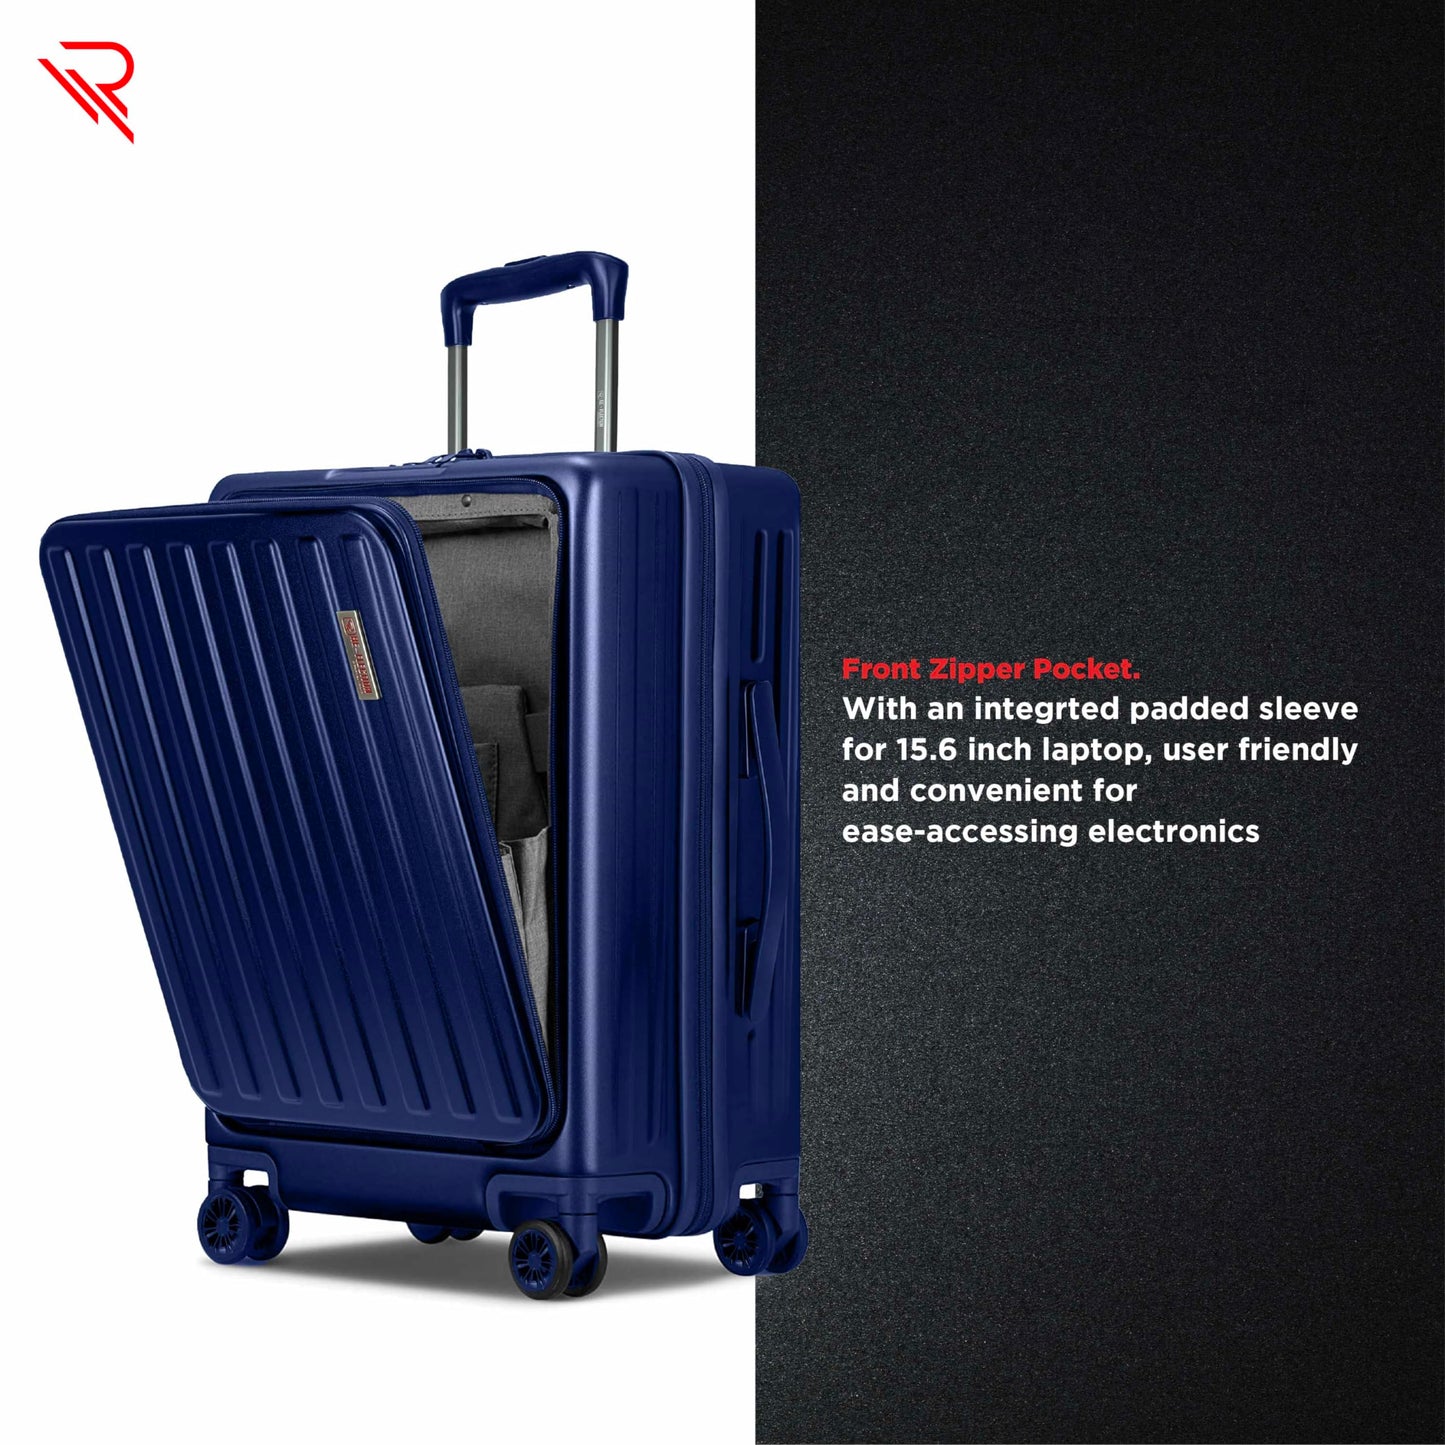 REFLECTION Business Travel 20"Carry On Luggage with Front Open Laptop Compartment|Hardside Suitcase|4 Spinner Wheels|Premium Quality|Professional look(Blue)